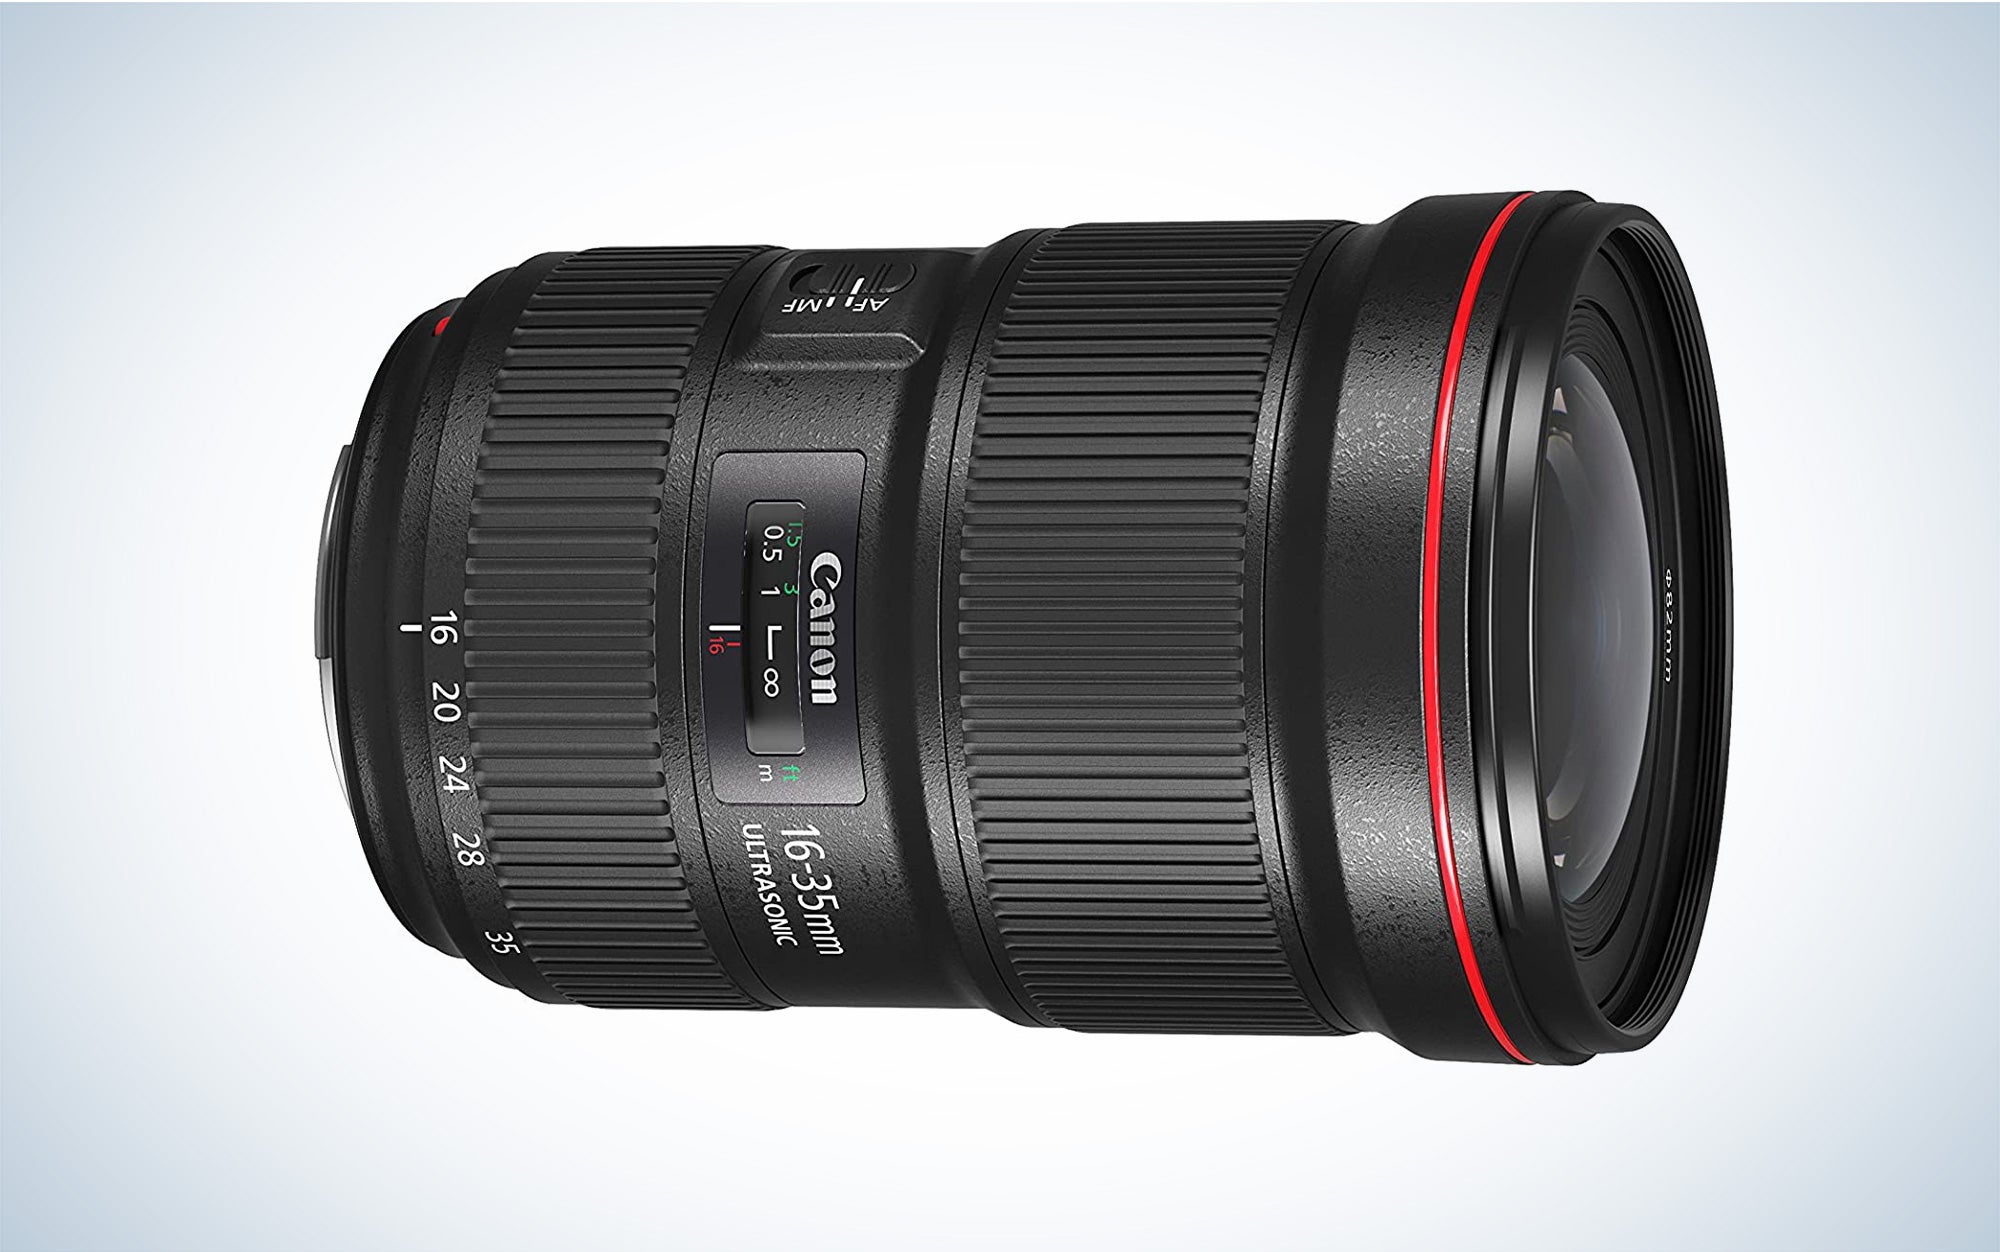 Canon 16-35mm zoom lens is the best wide angle lens.